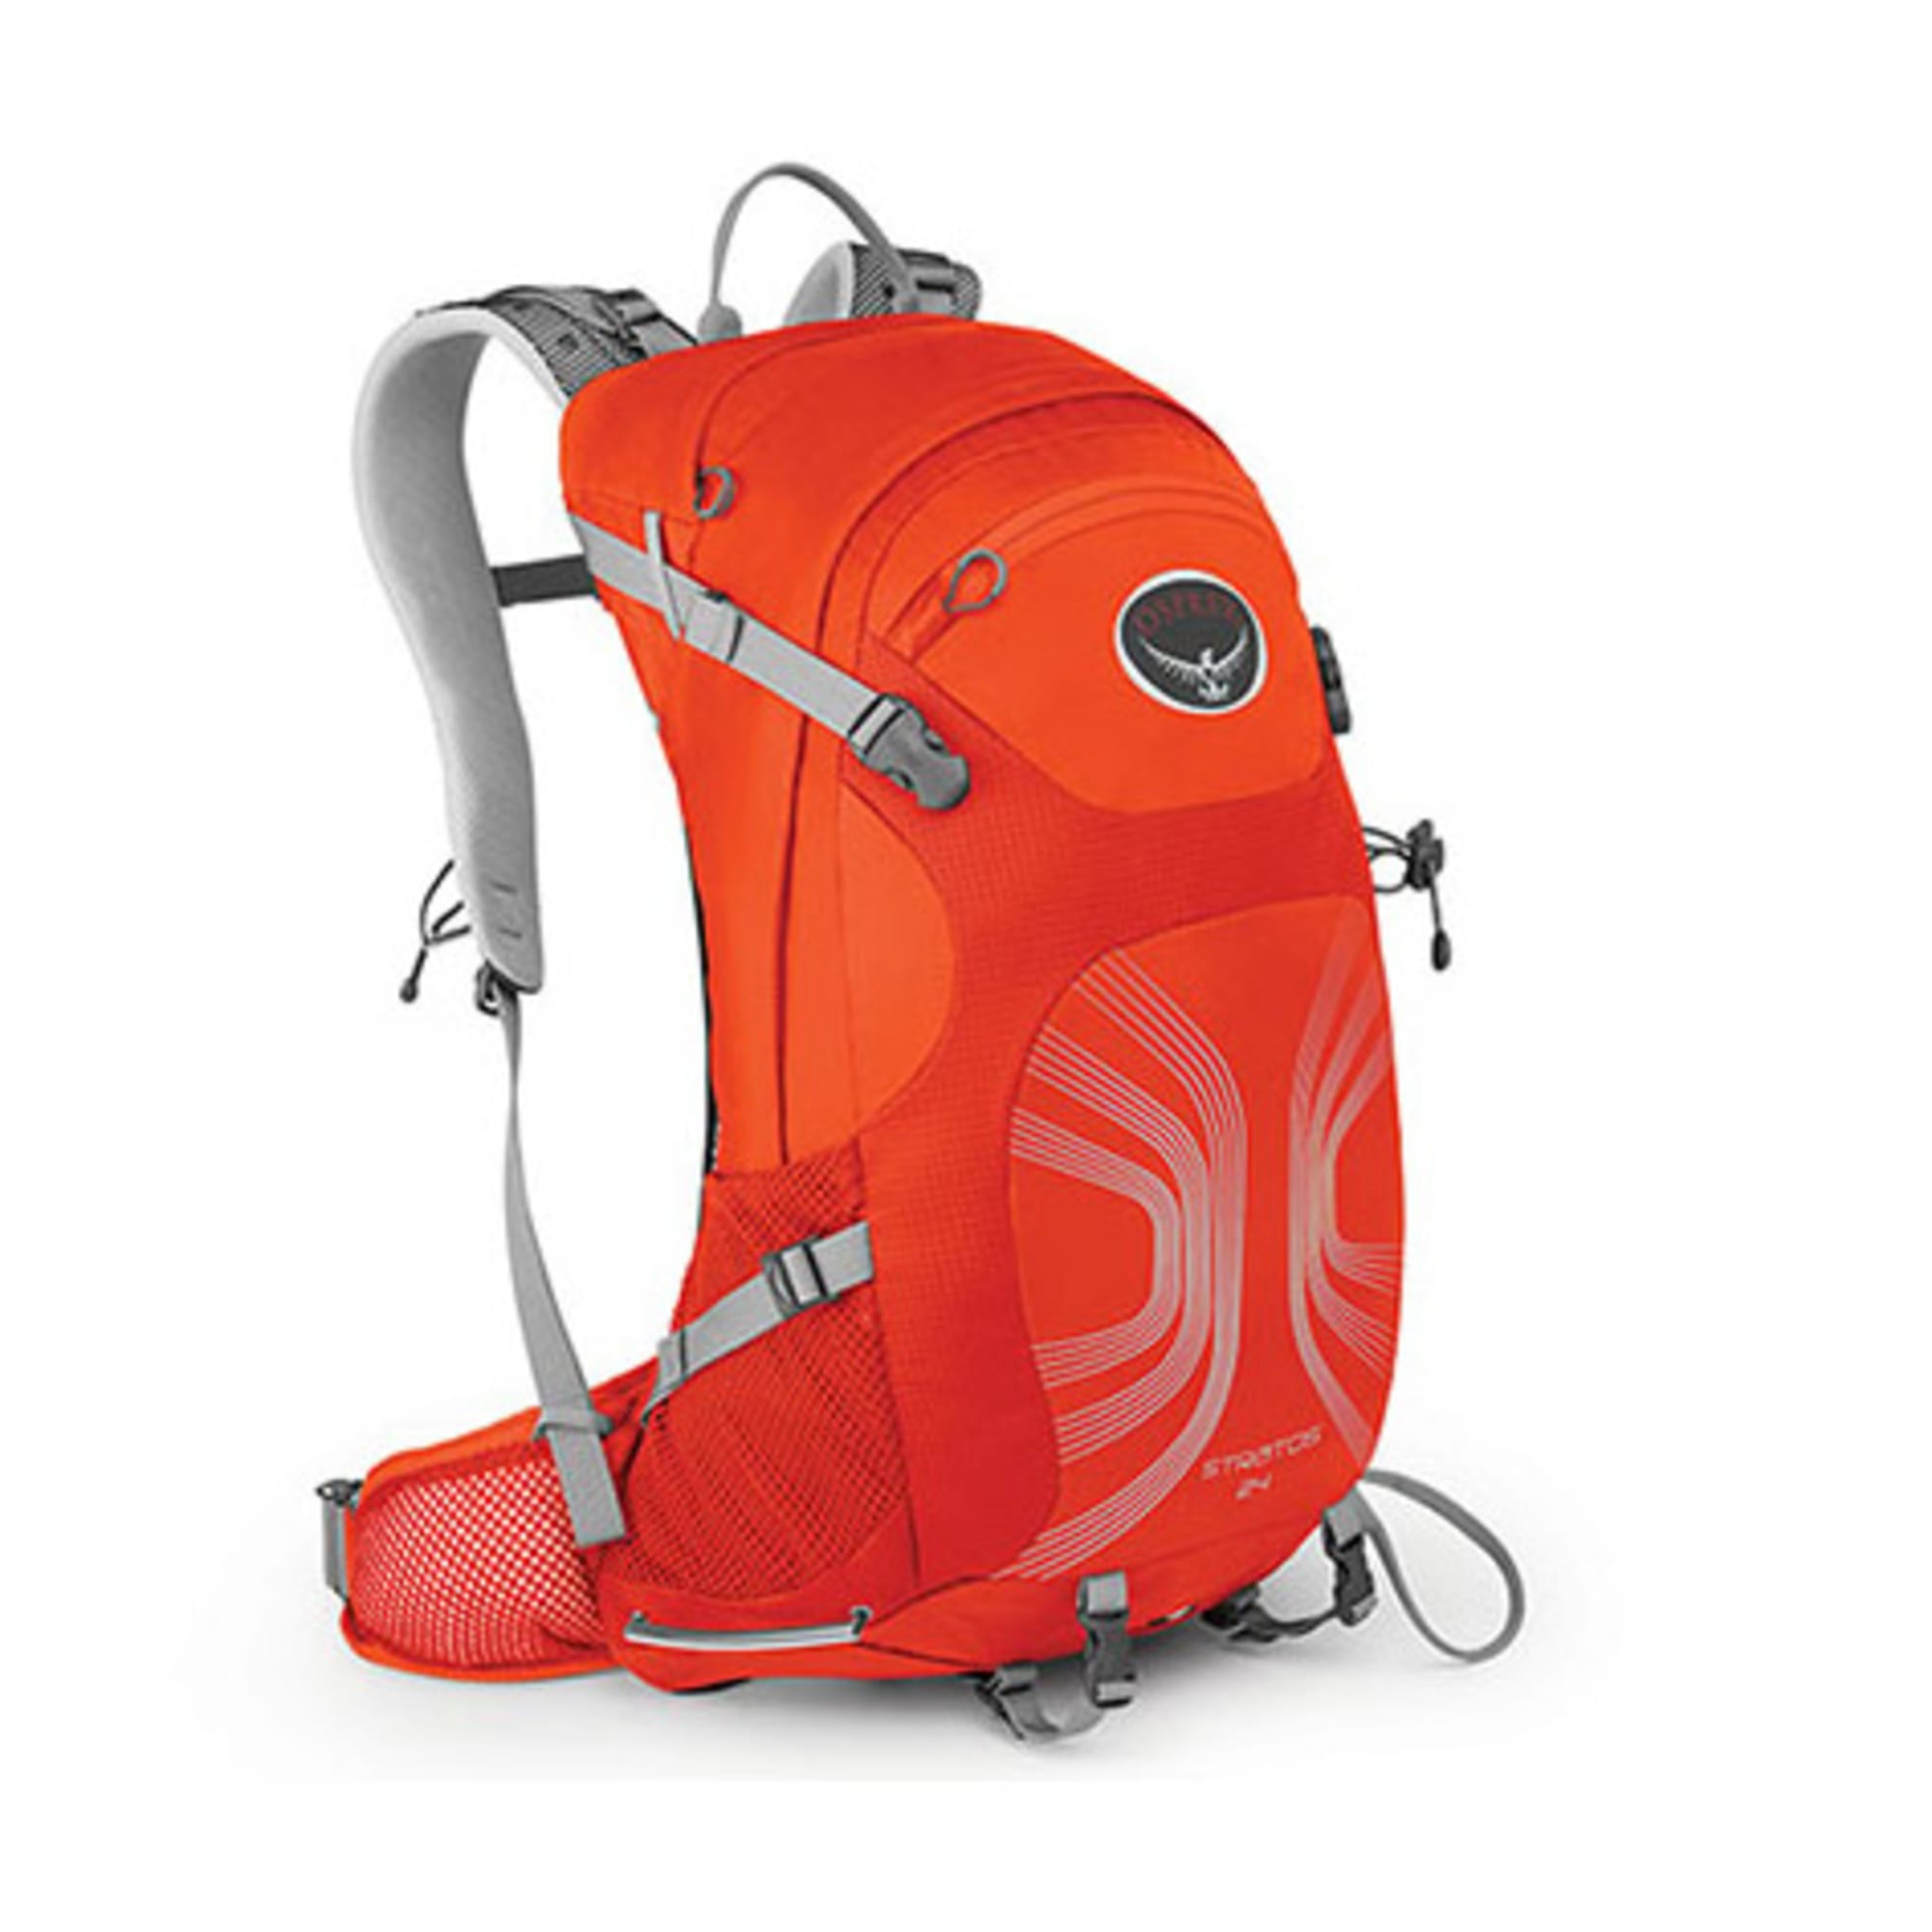 Osprey Stratos 24 Backpack Eastern Mountain Sports